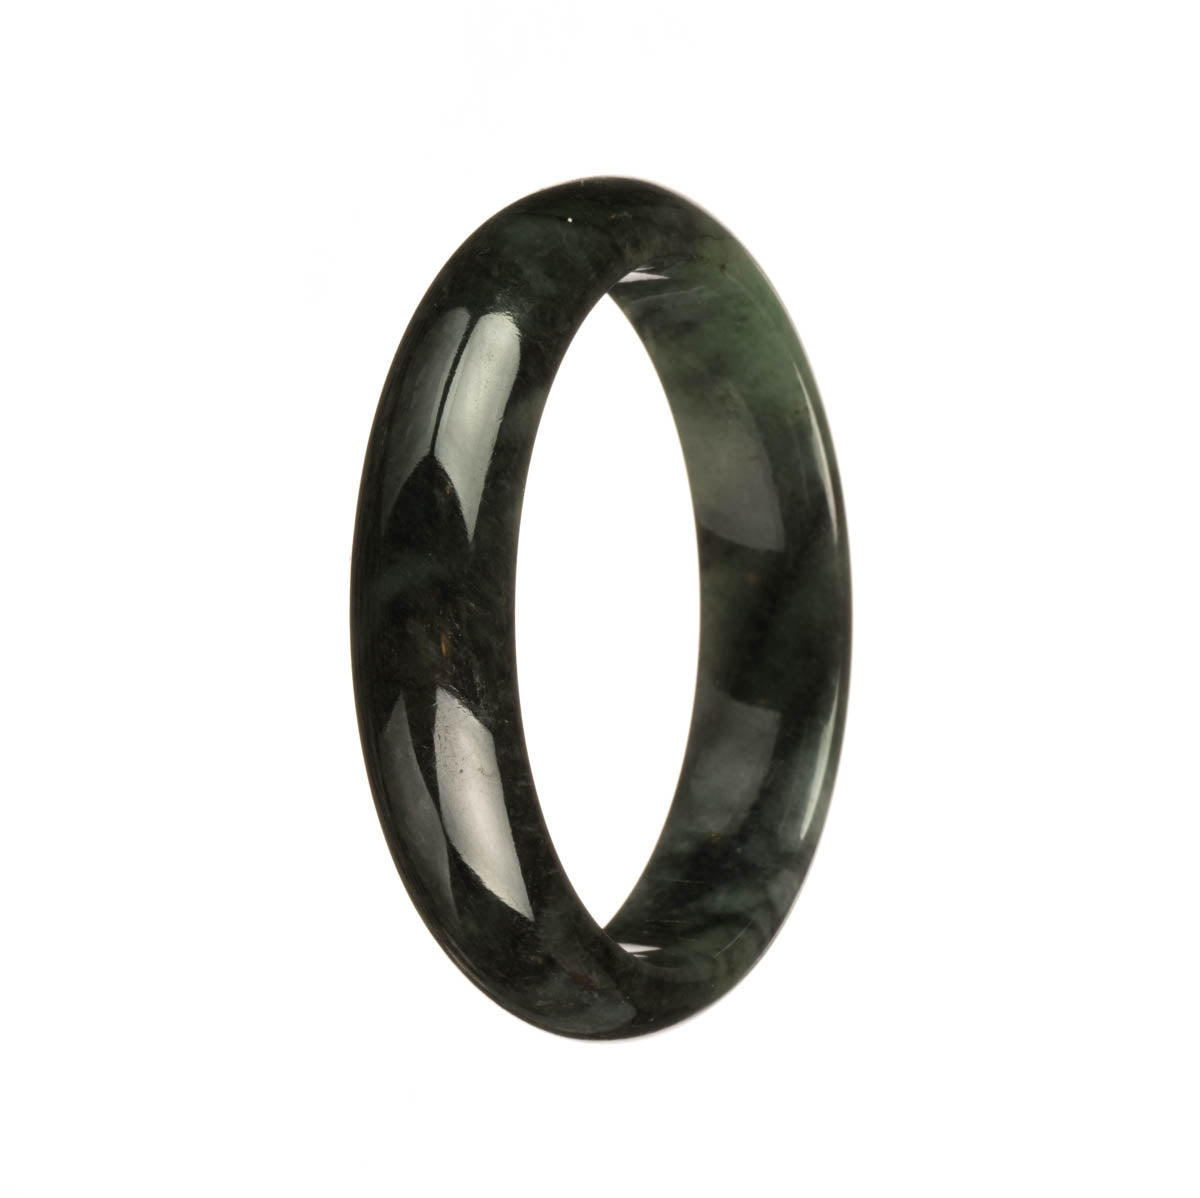 A close-up photo of a beautiful dark green Burma Jade bangle. The bangle has a half-moon shape and measures 55mm in diameter. It is certified Grade A and is a stunning piece of jewelry from MAYS™.